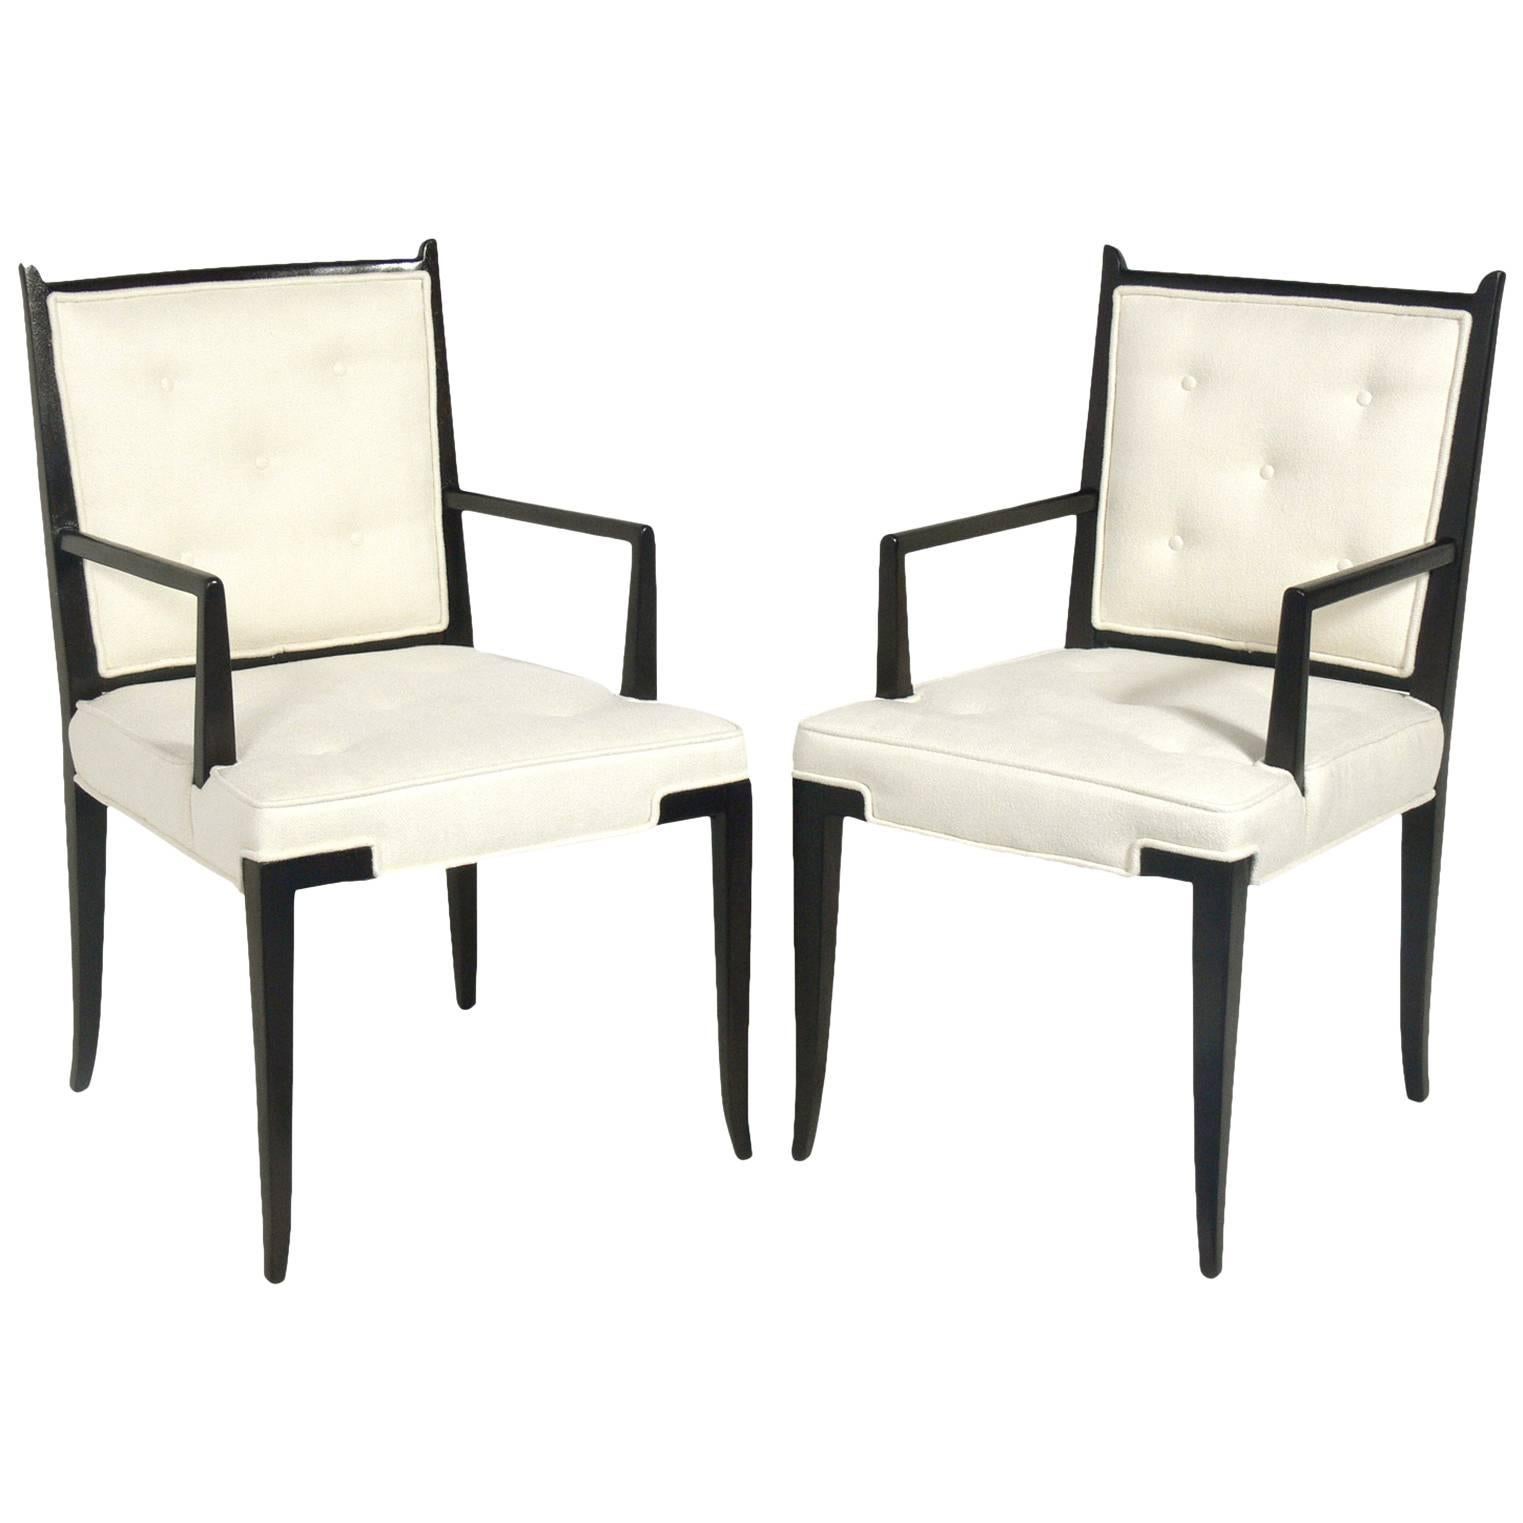 Pair of Tommi Parzinger Chairs